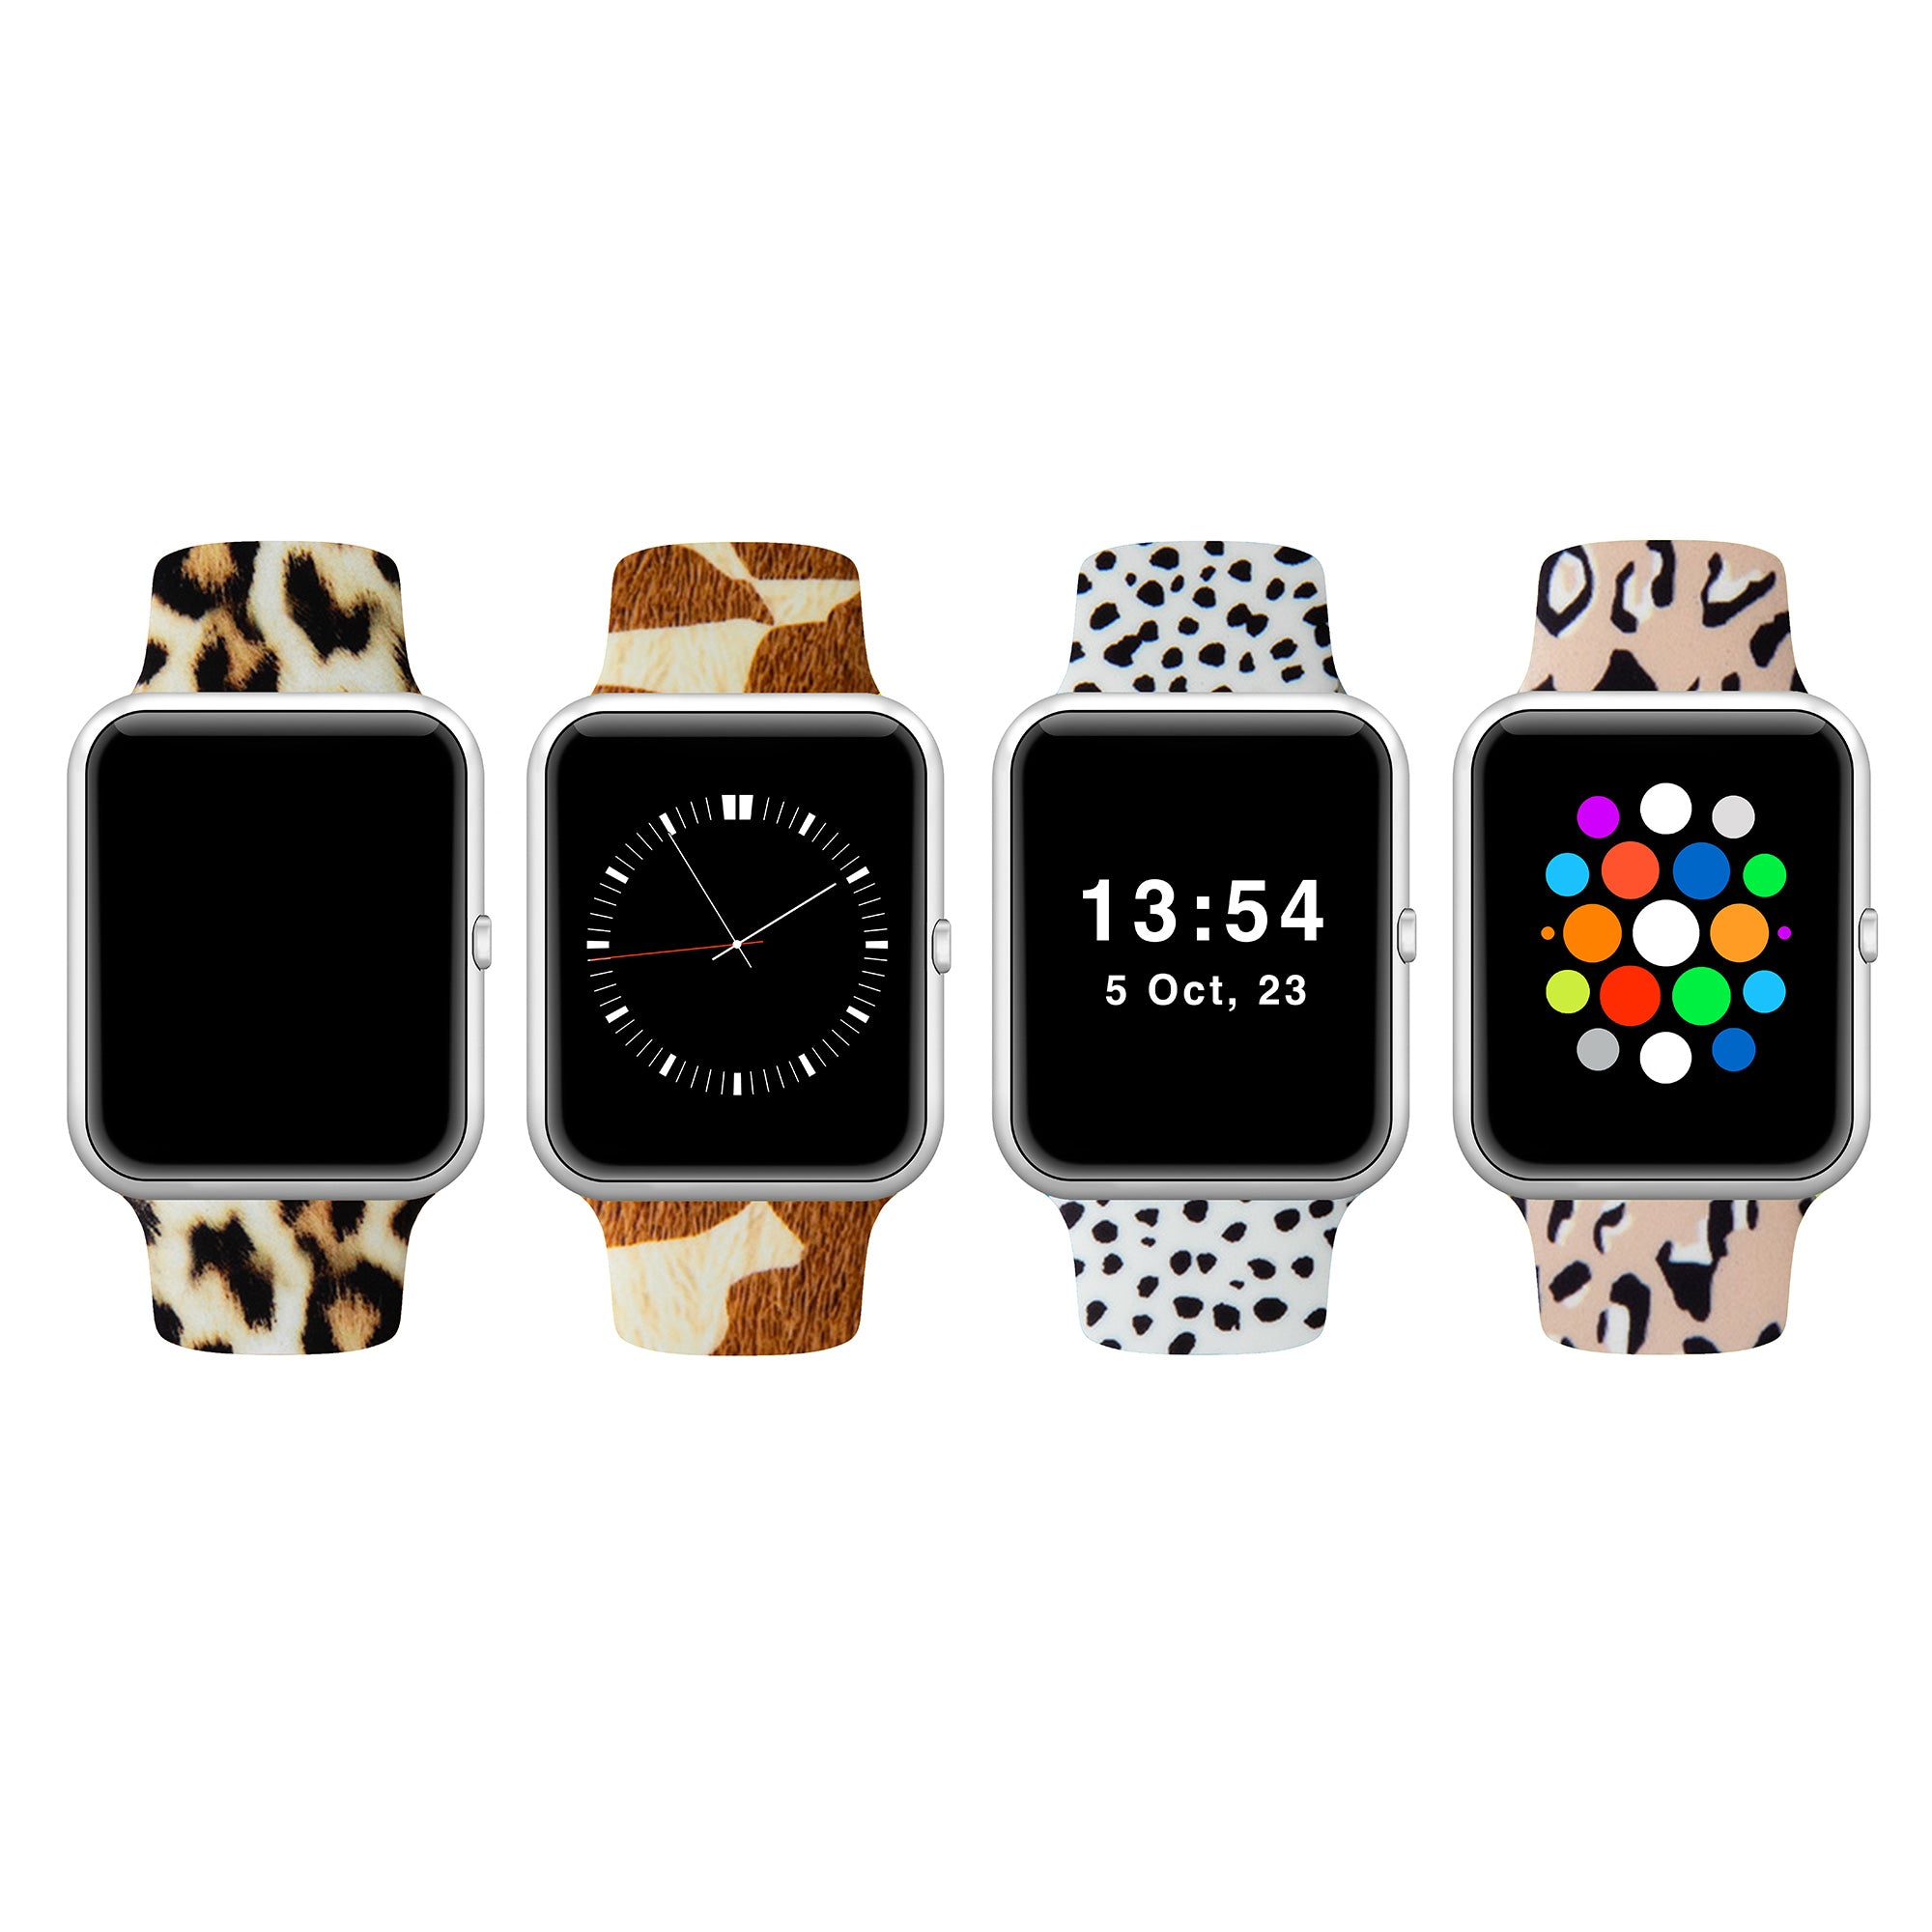 Patterned Silicone Apple Watch Band 38mm/40mm 42mm/44mm - Black & White Dalmatian - 38mm/40mm